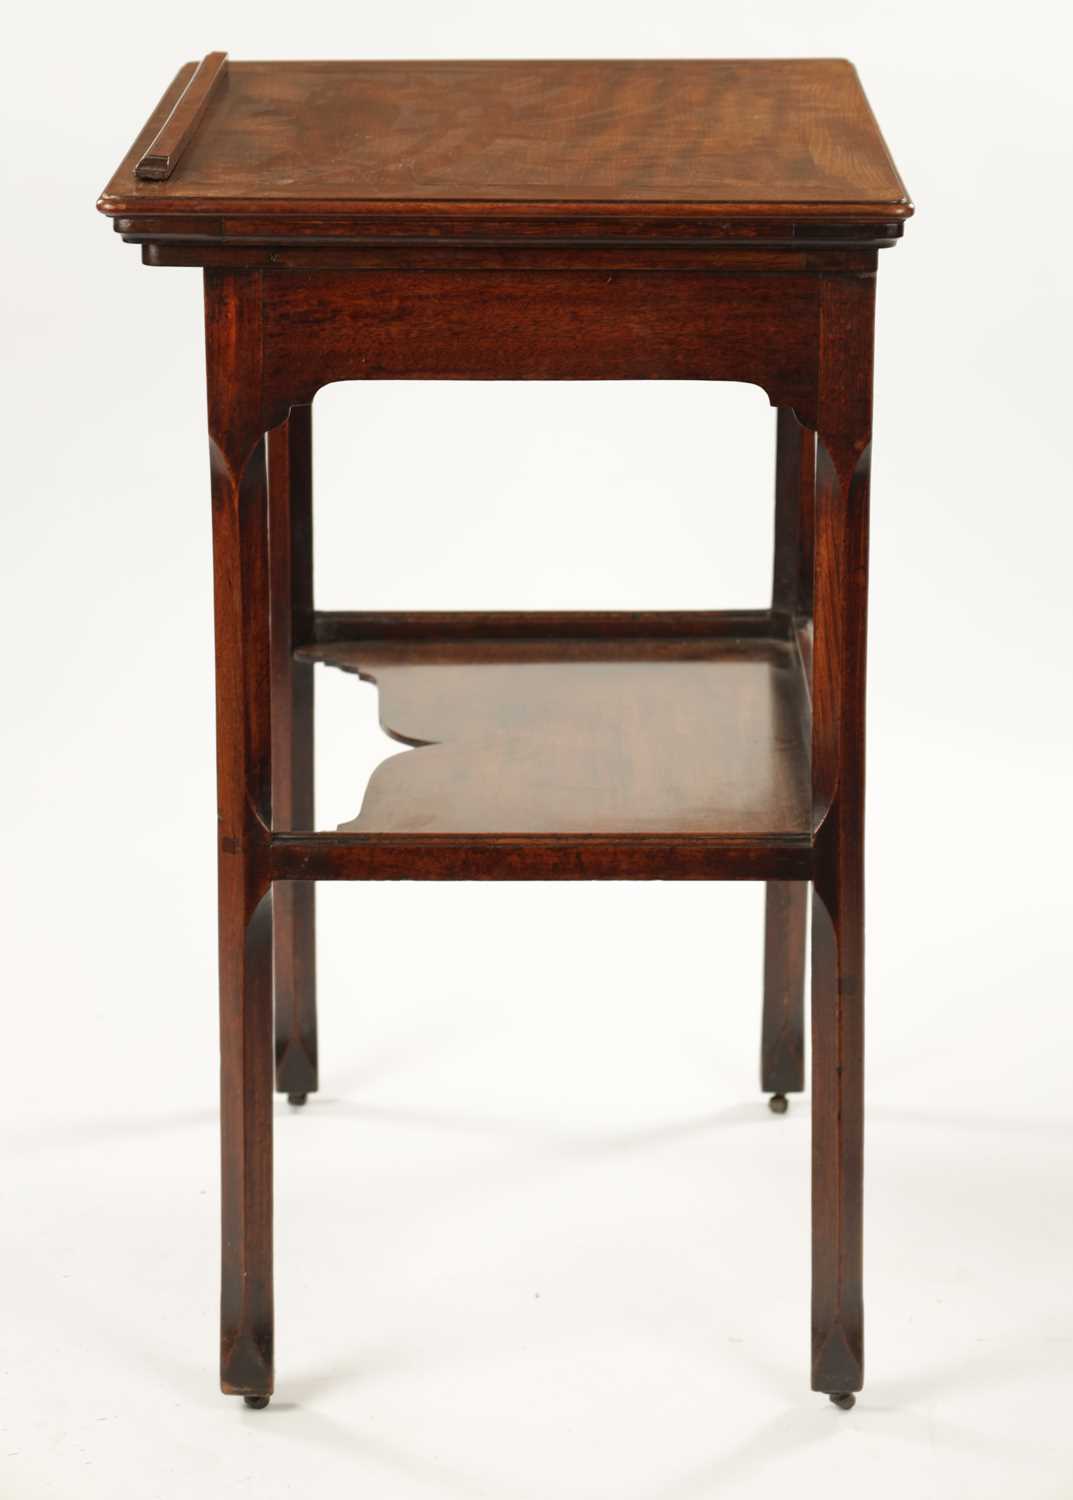 A RARE AND UNUSUAL GEORGE II MAHOGANY ARTIST’S TABLE IN THE MANNER OF THOMAS CHIPPENDALE - Image 12 of 14